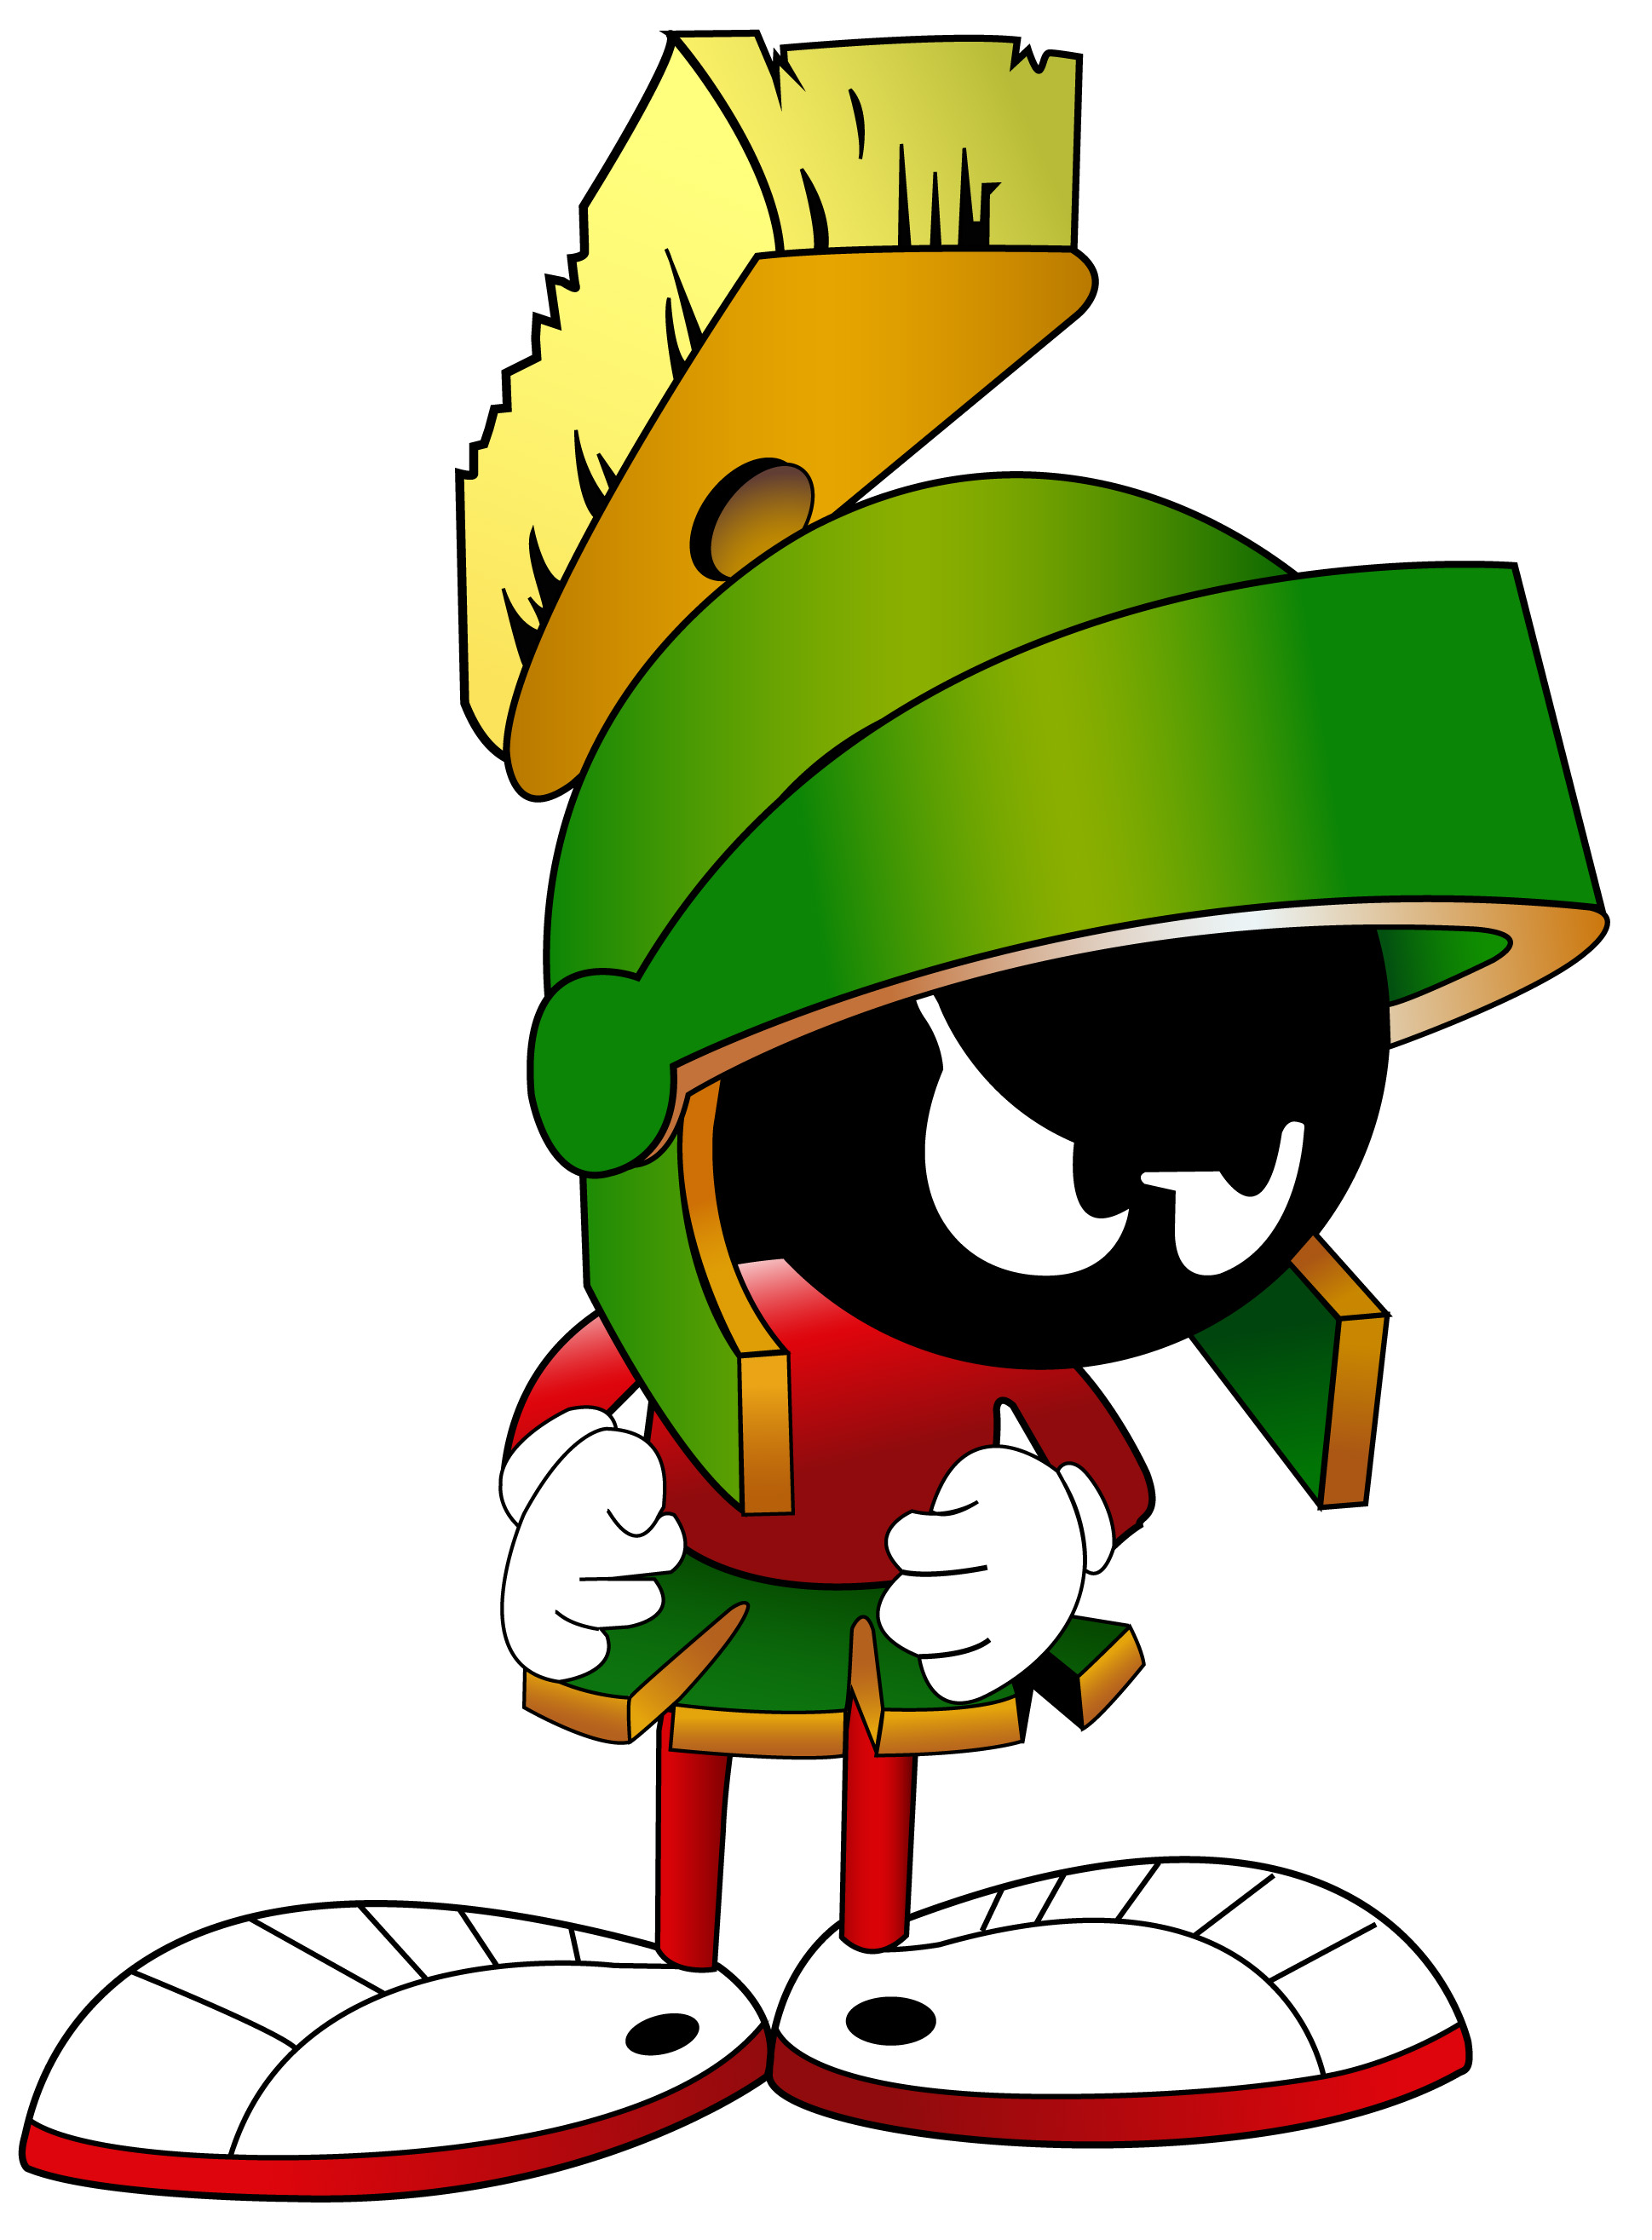 Marvin The Martian (character) 